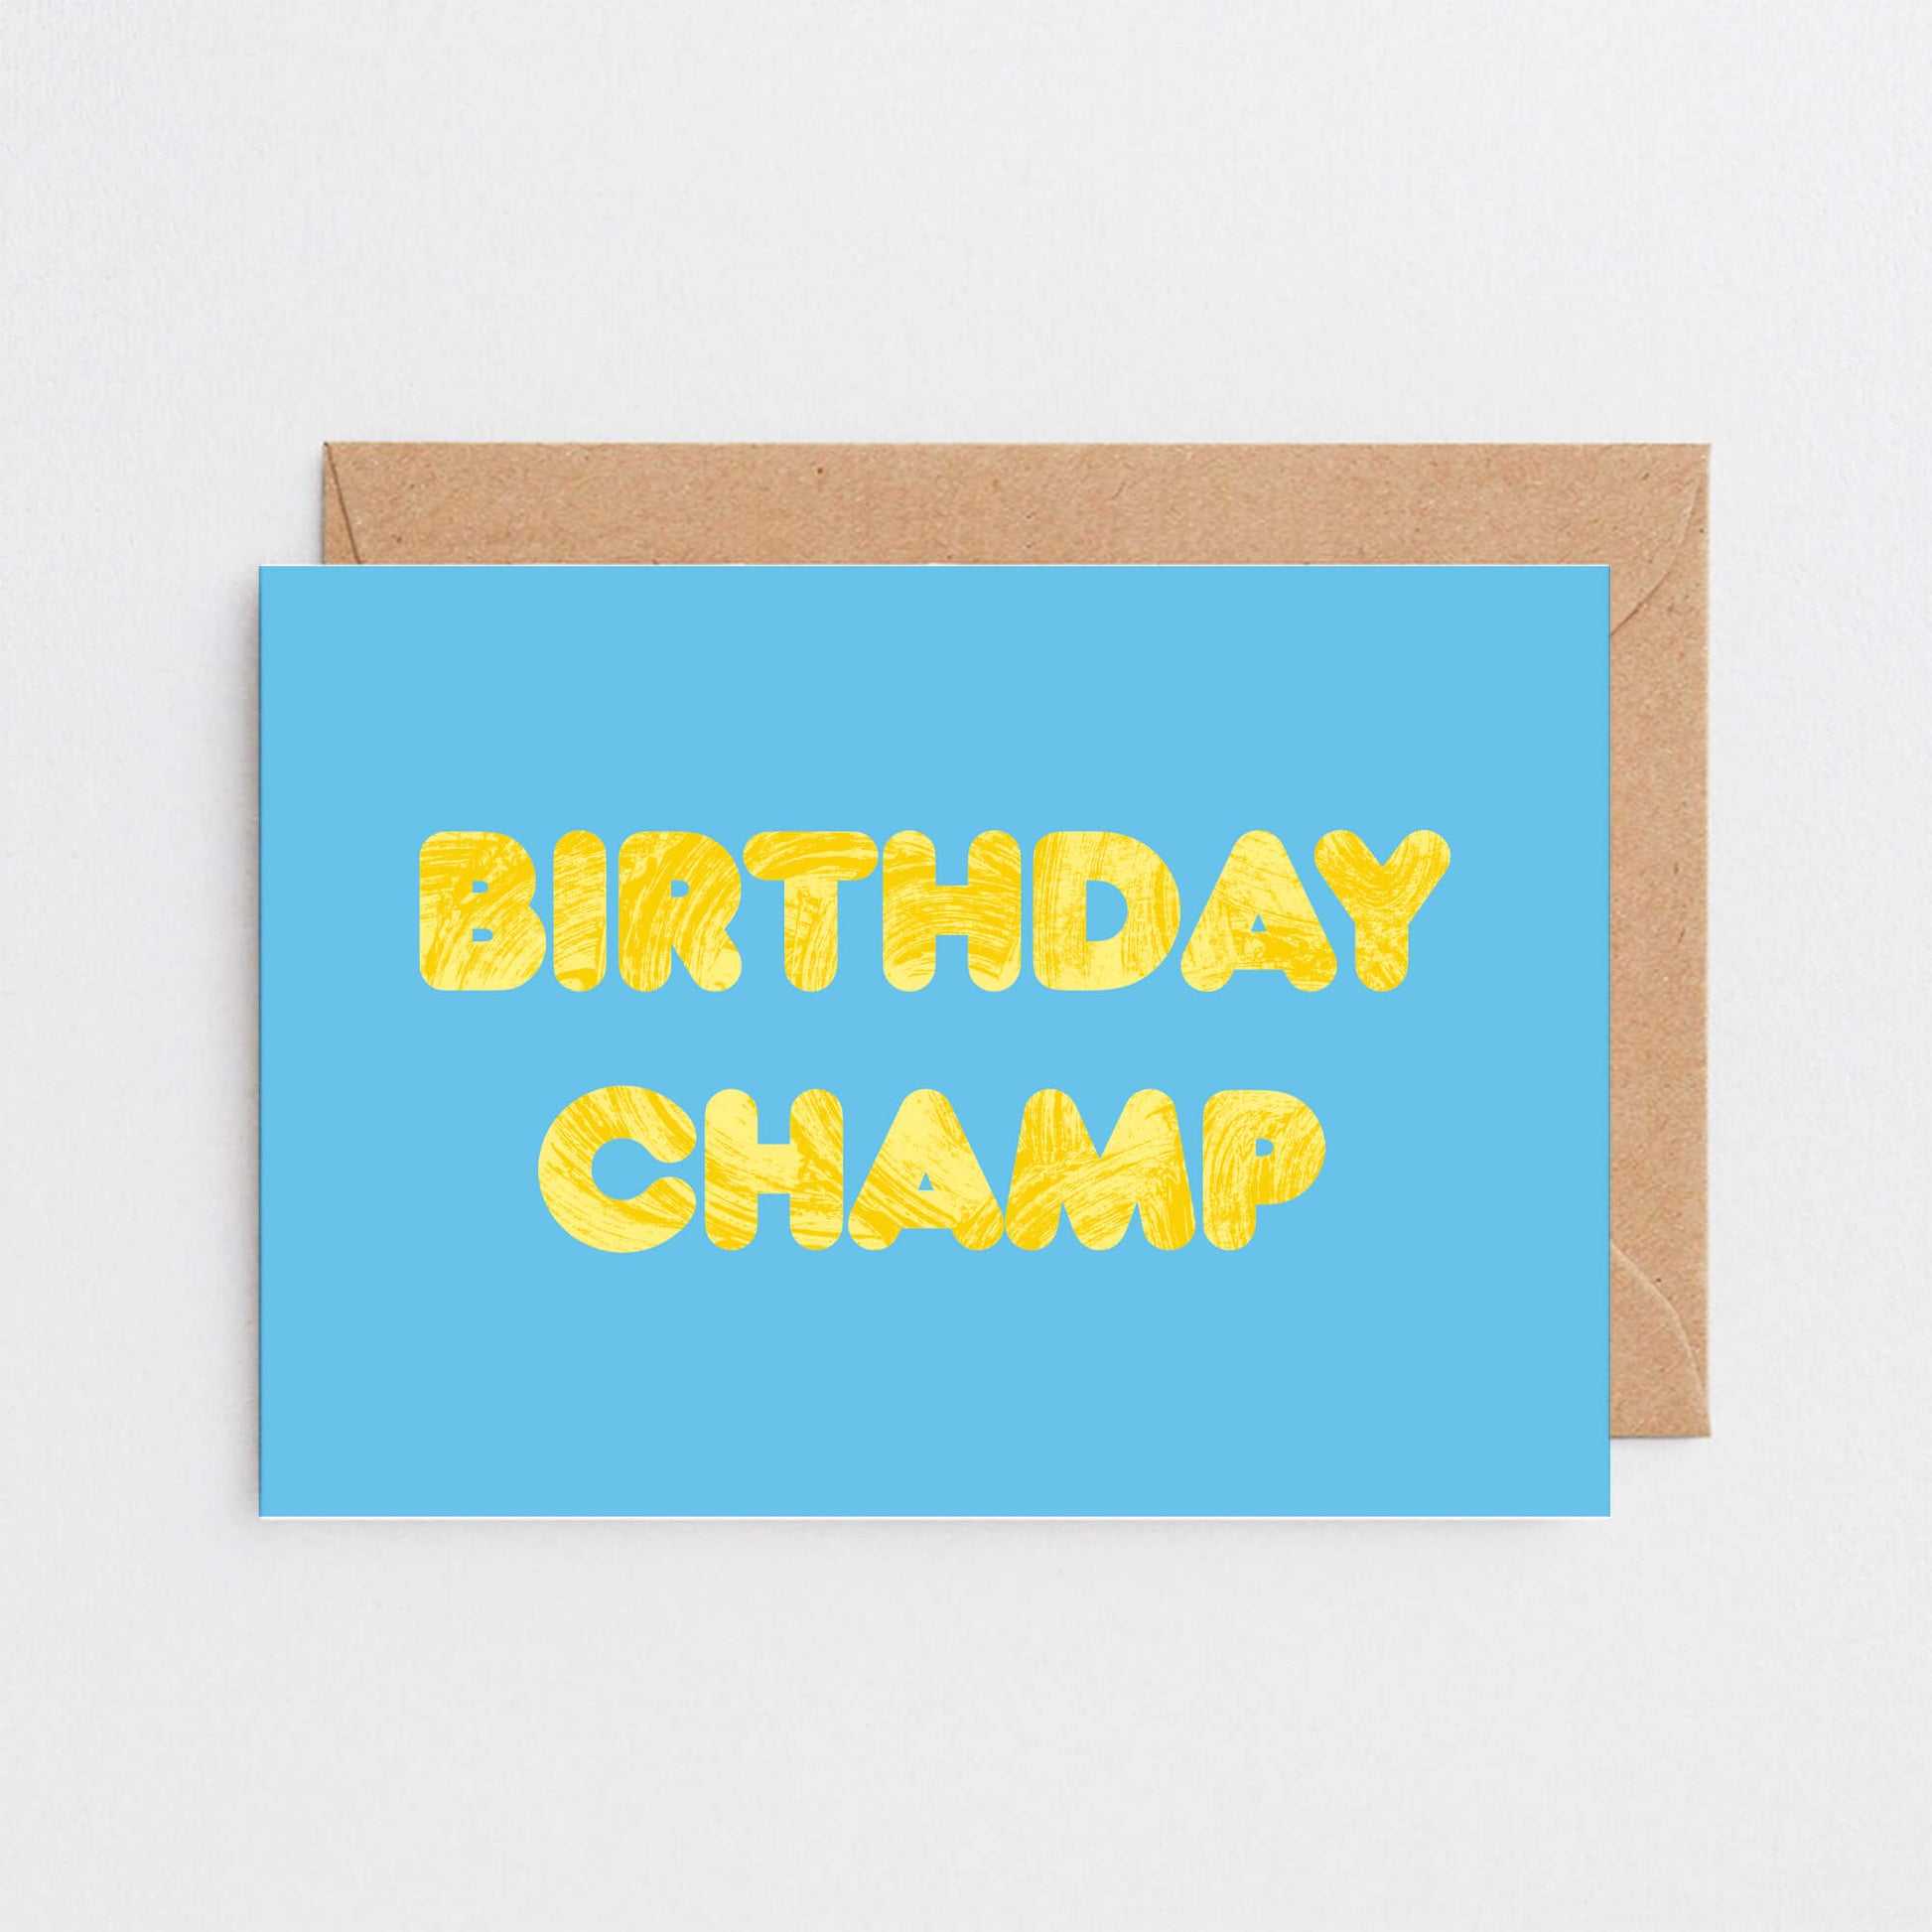 Birthday Champ Card by SixElevenCreations. Printed on sustainable card. Product Code SE5103A6